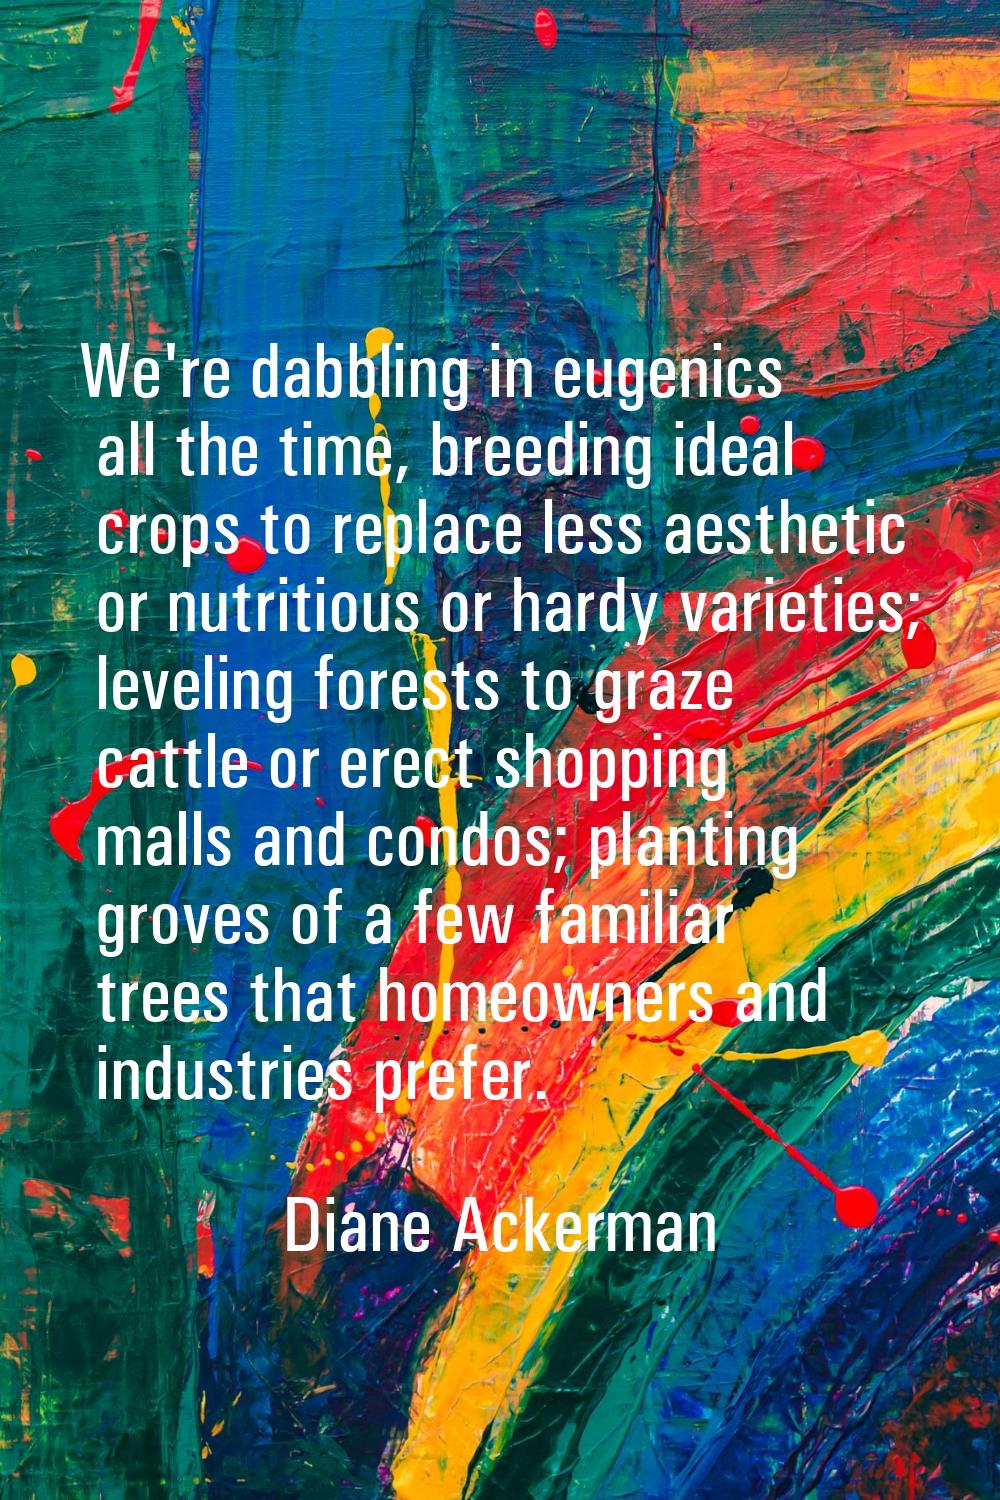 We're dabbling in eugenics all the time, breeding ideal crops to replace less aesthetic or nutritio